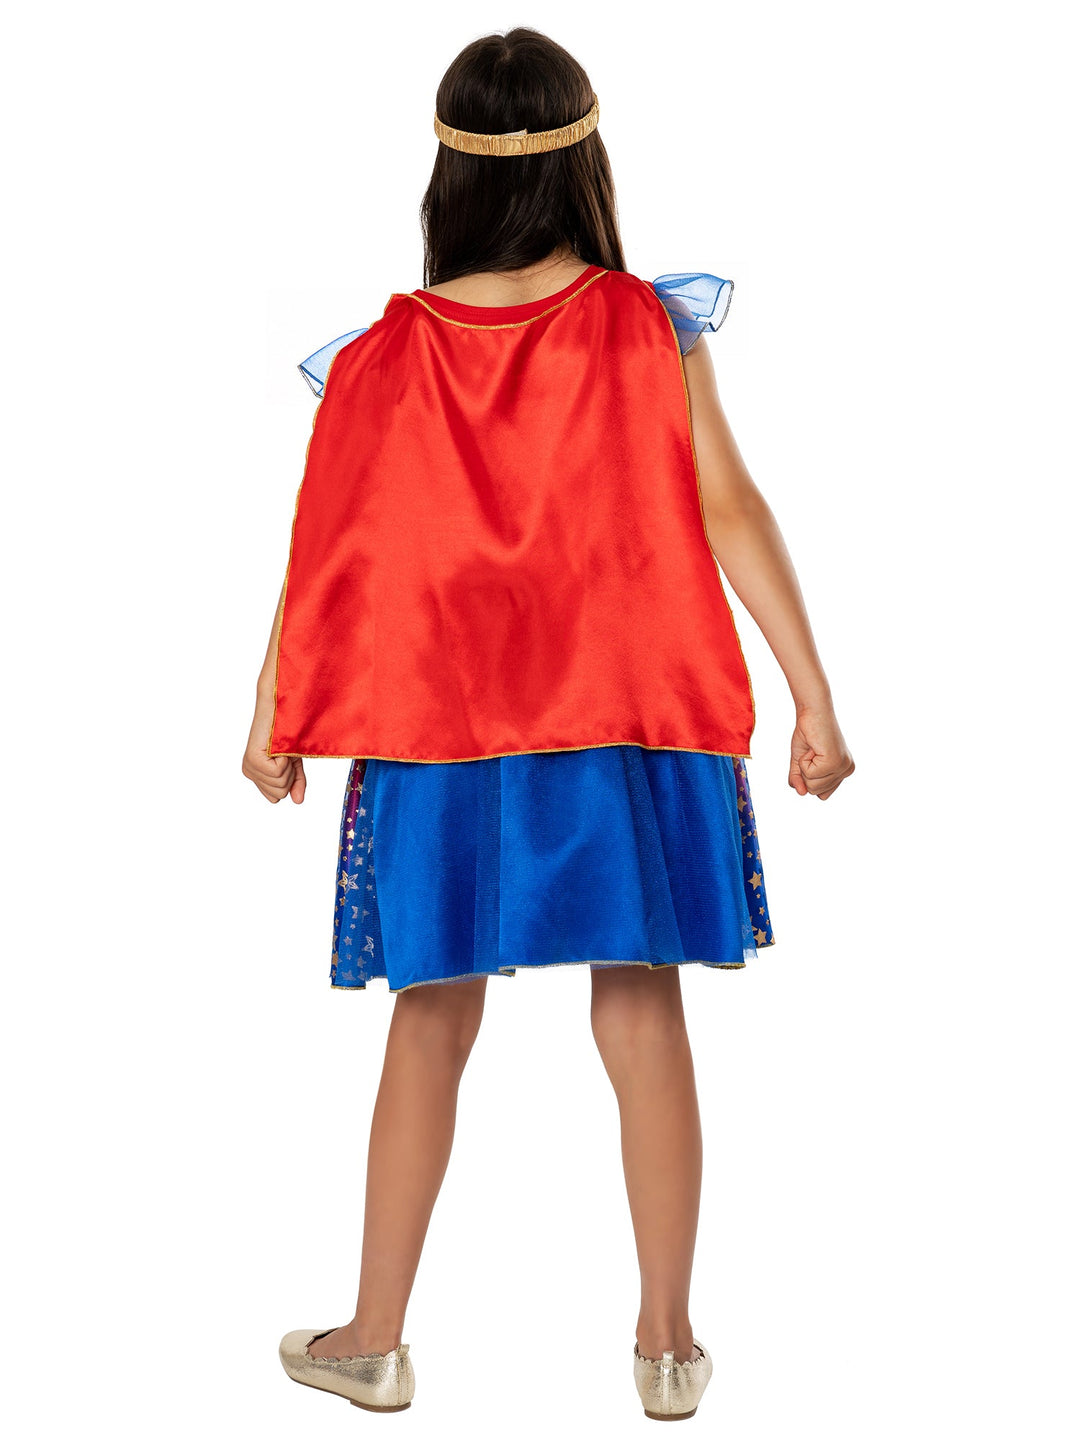 Wonder Woman Costume Deluxe Childs Dress_2